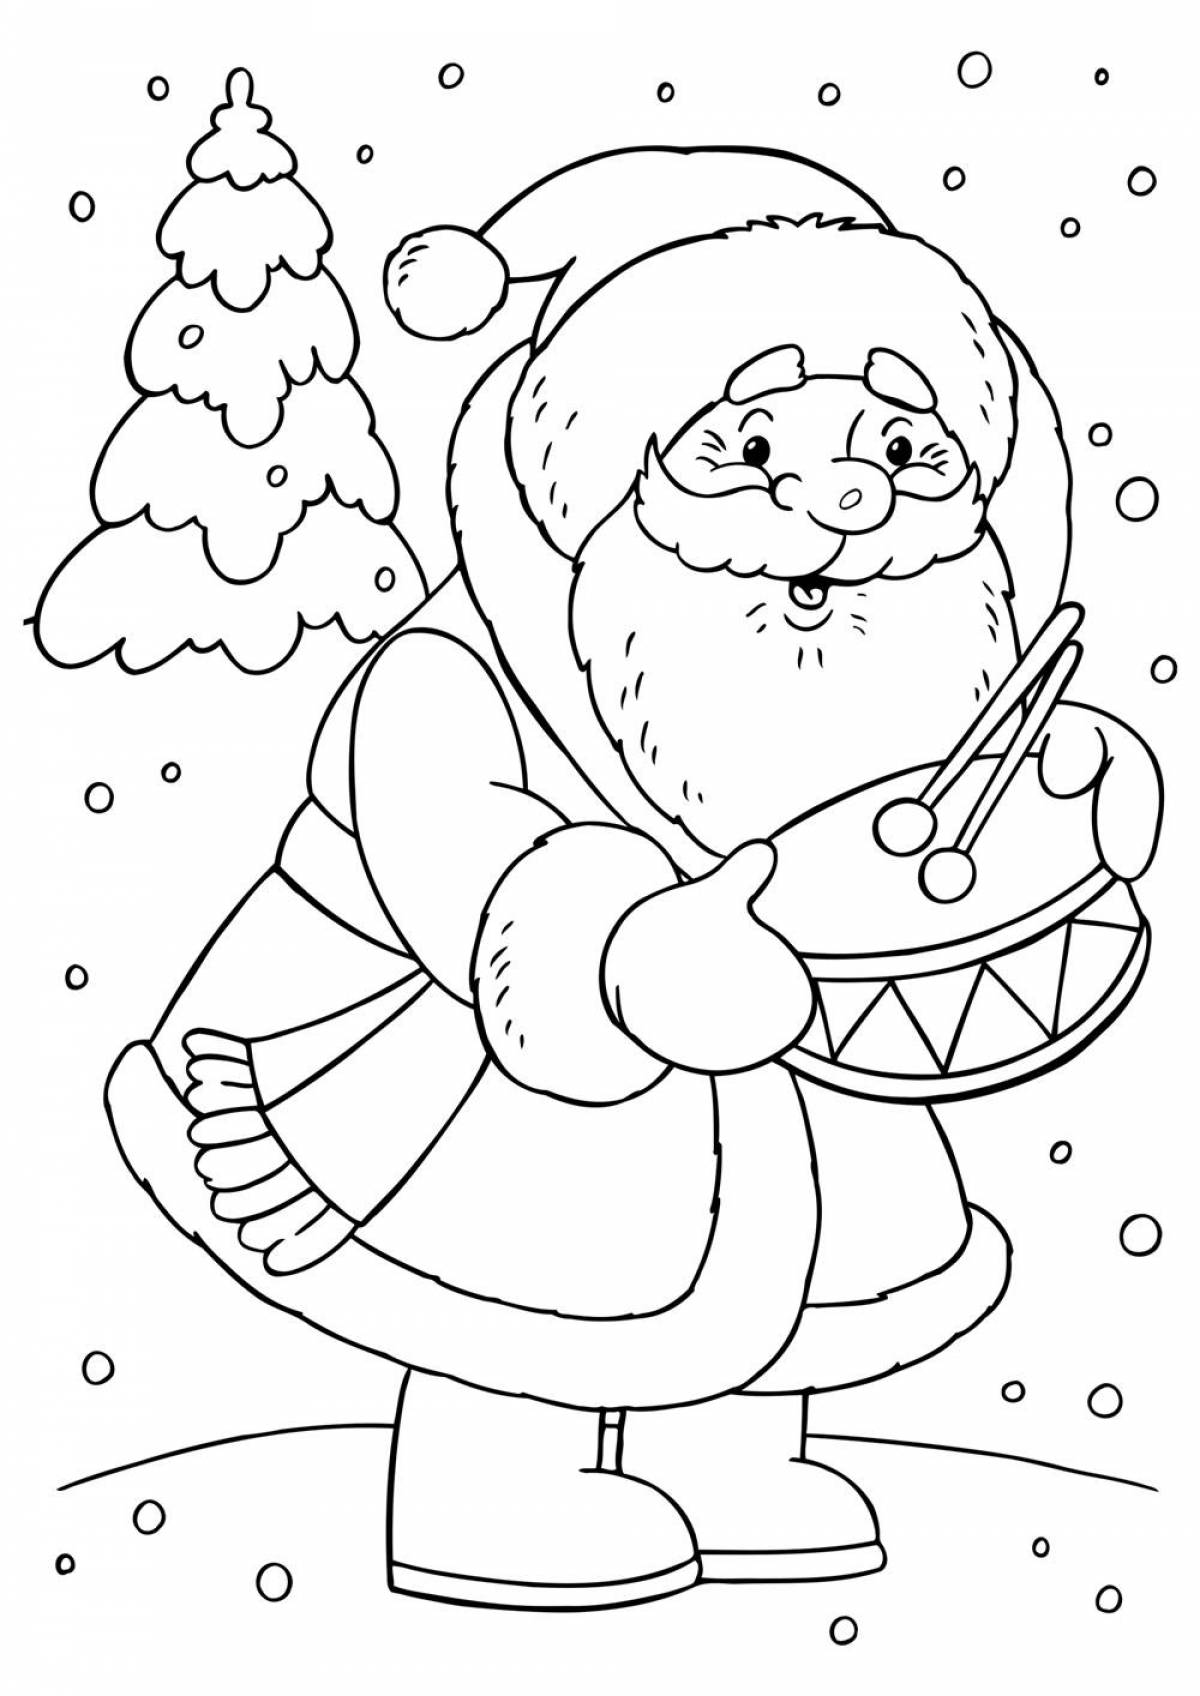 Innovative Christmas coloring book for 3-4 year olds